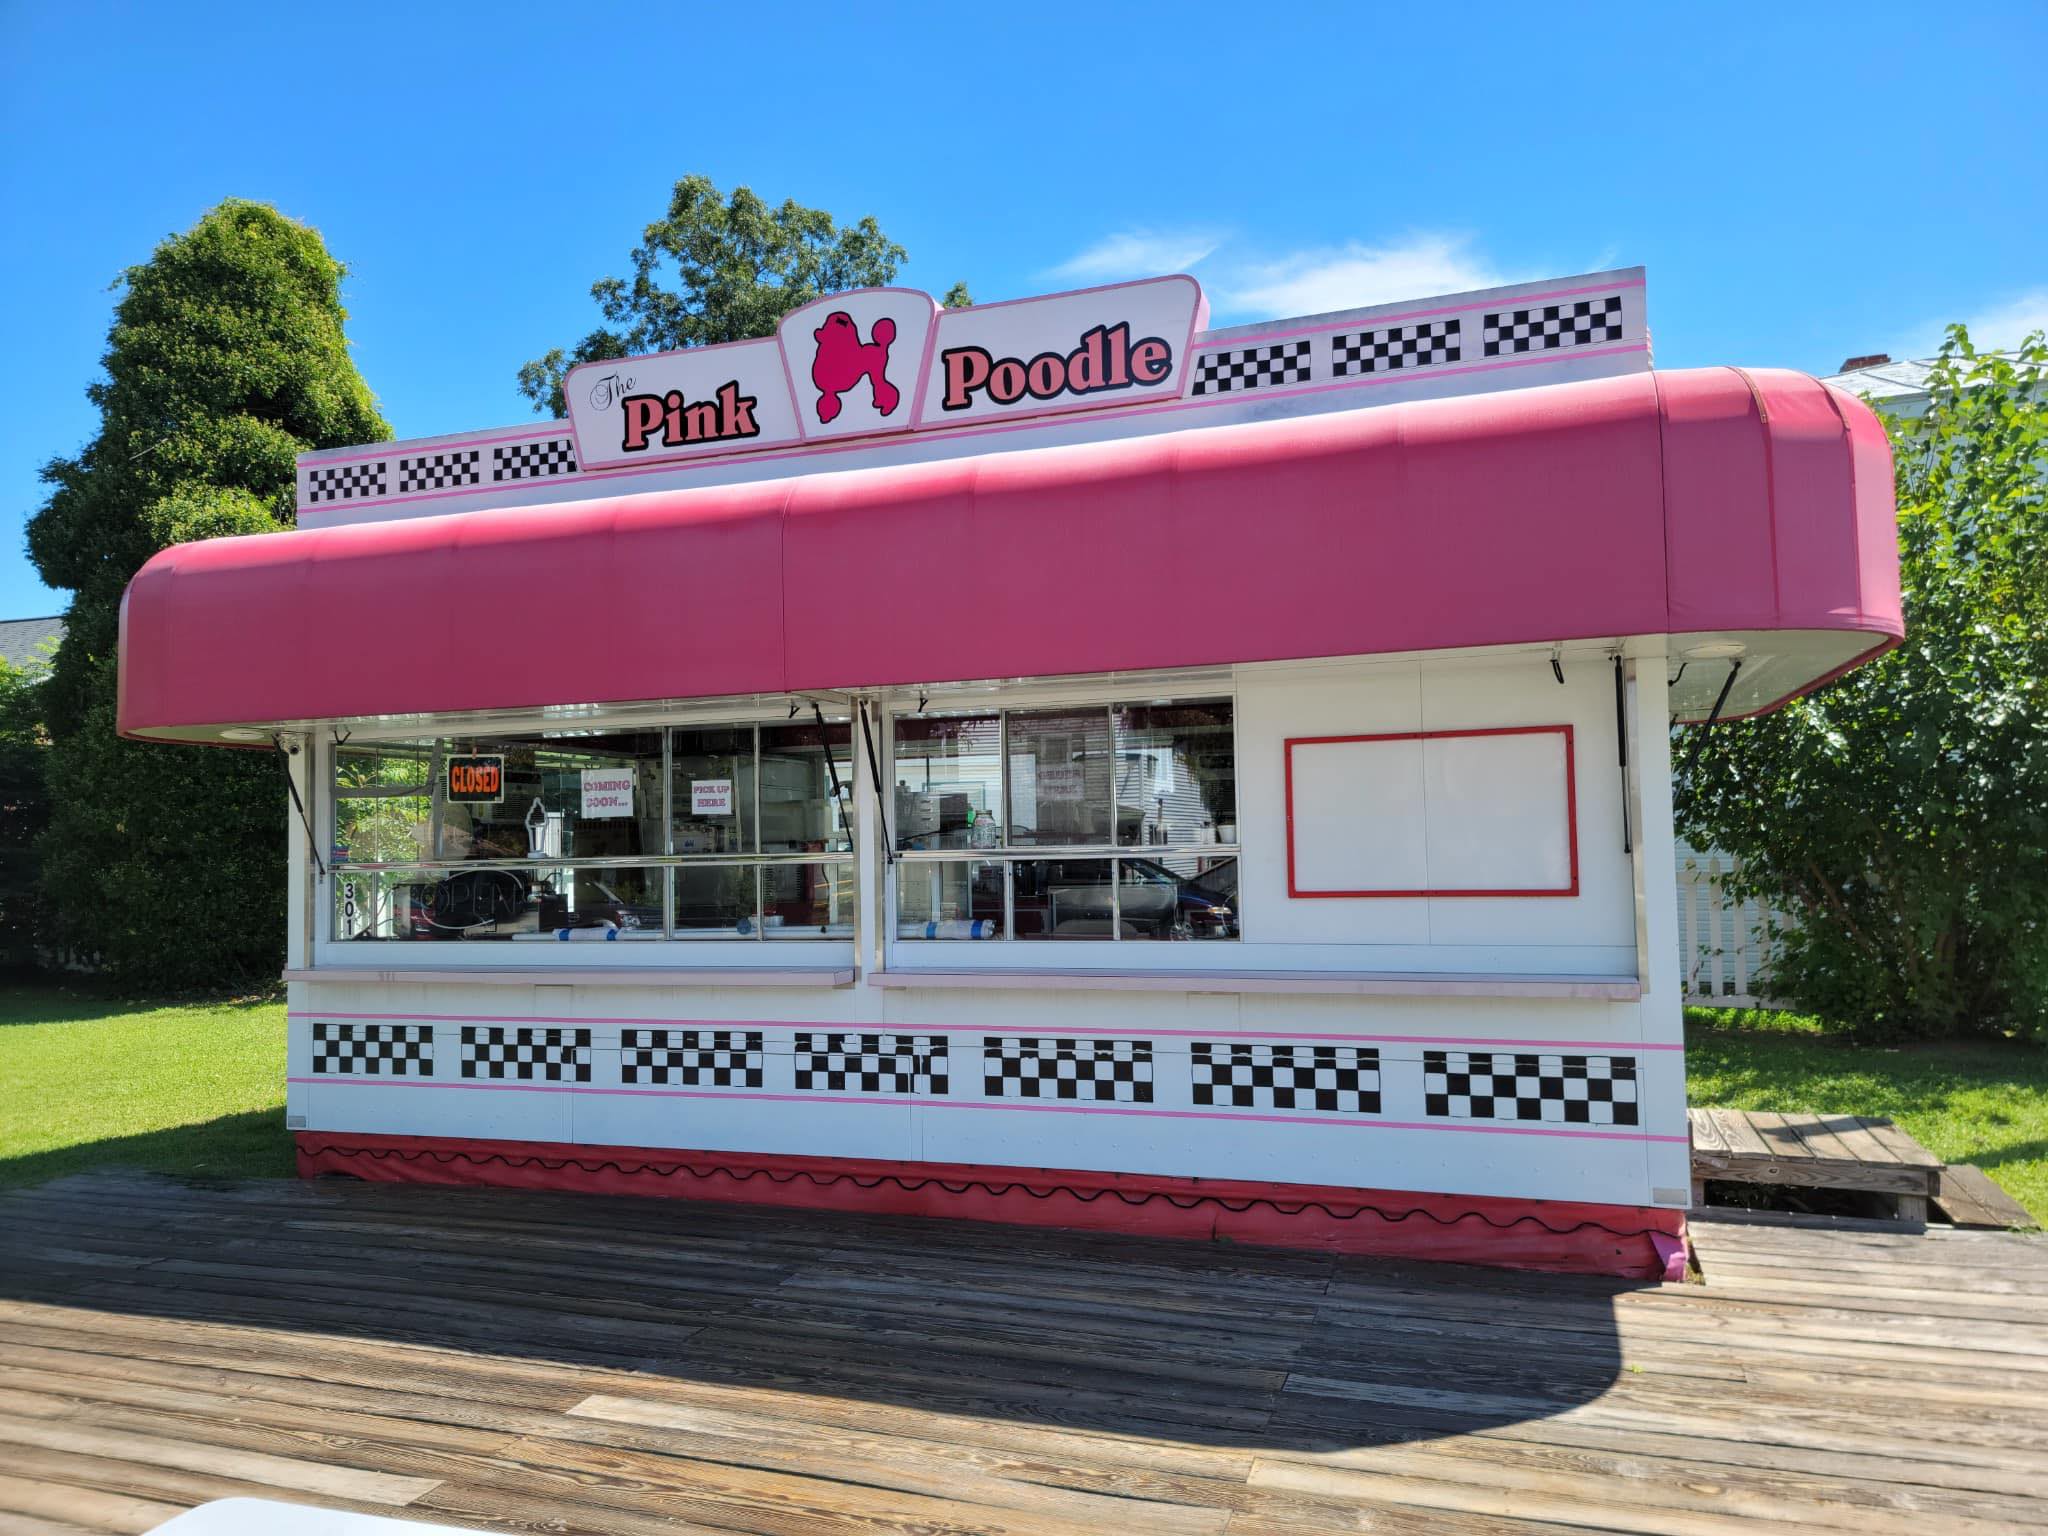 The Pink Poodle Ice Cream Stand